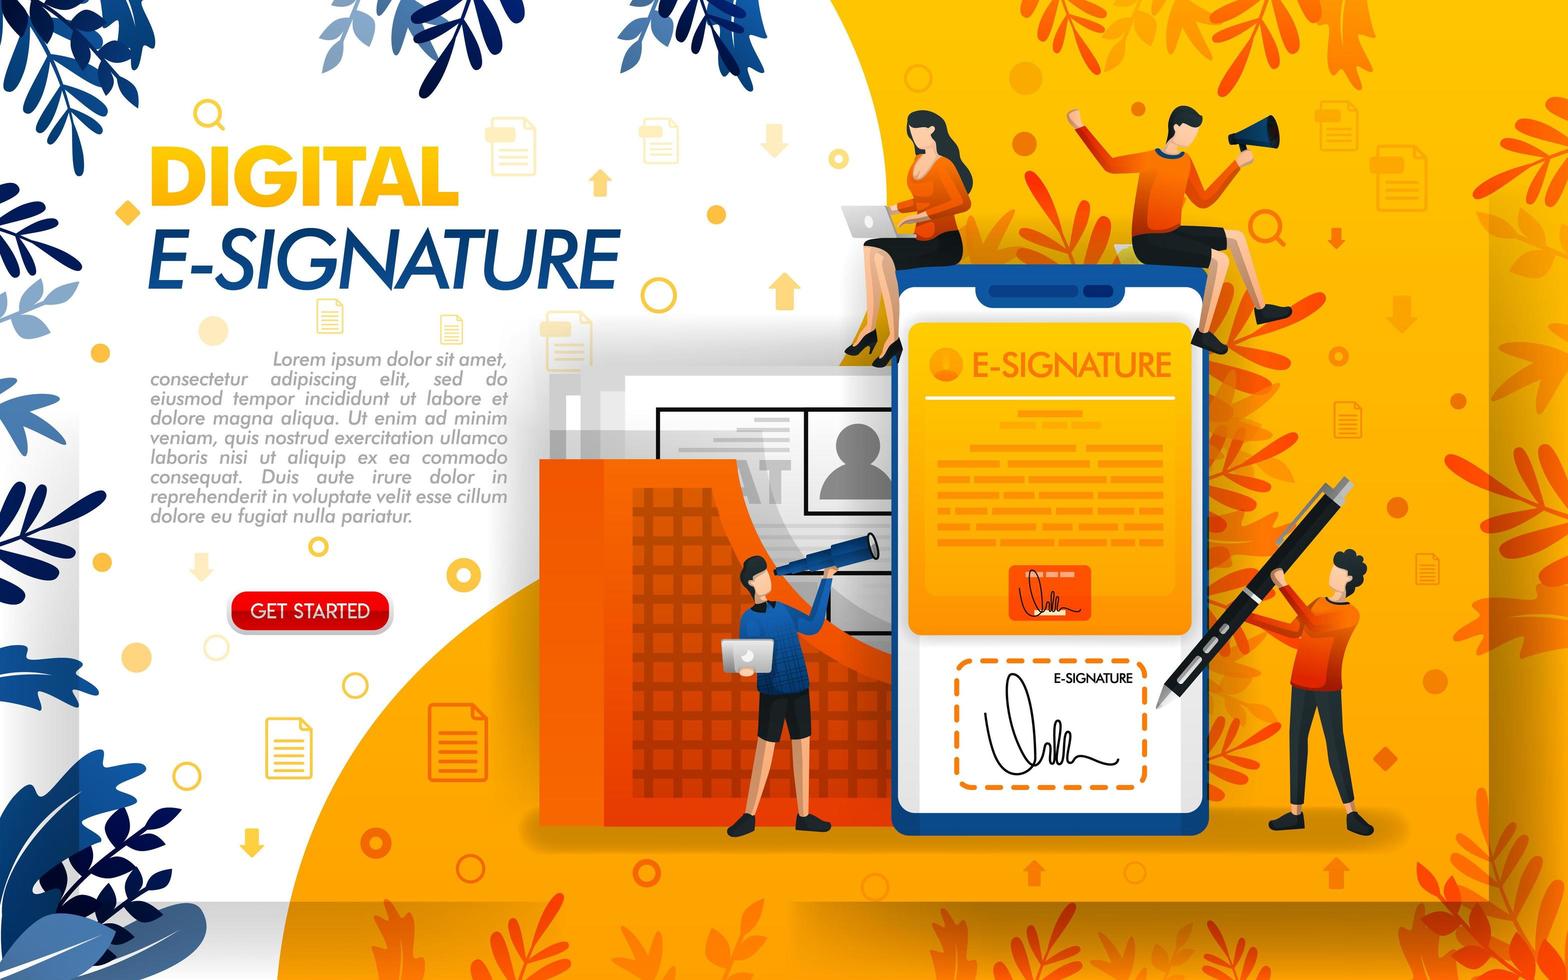 digital signature for document security. E-signatures for business purposes and making agreements, concept vector ilustration. can use for, landing page, template, ui, web, mobile app, poster, banner